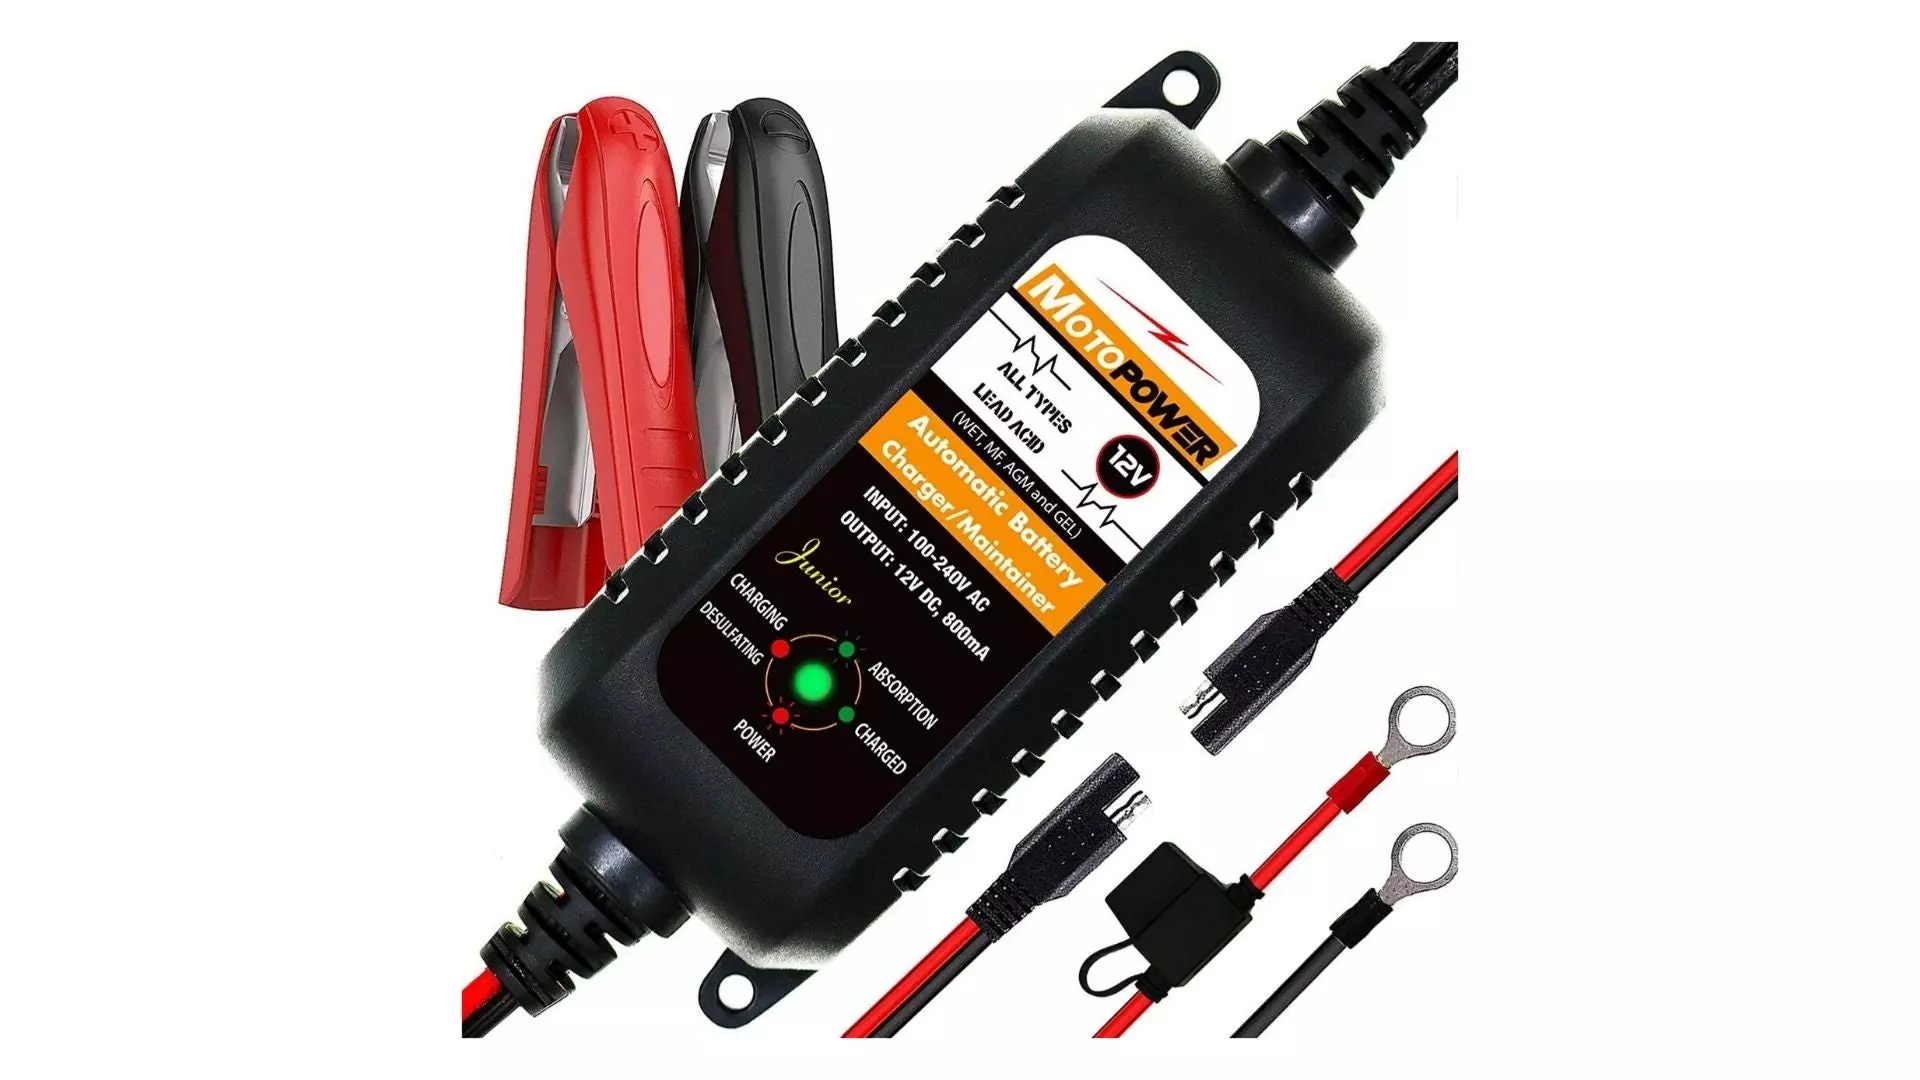 Motorpower 12V 800mA Automatic Battery Charger